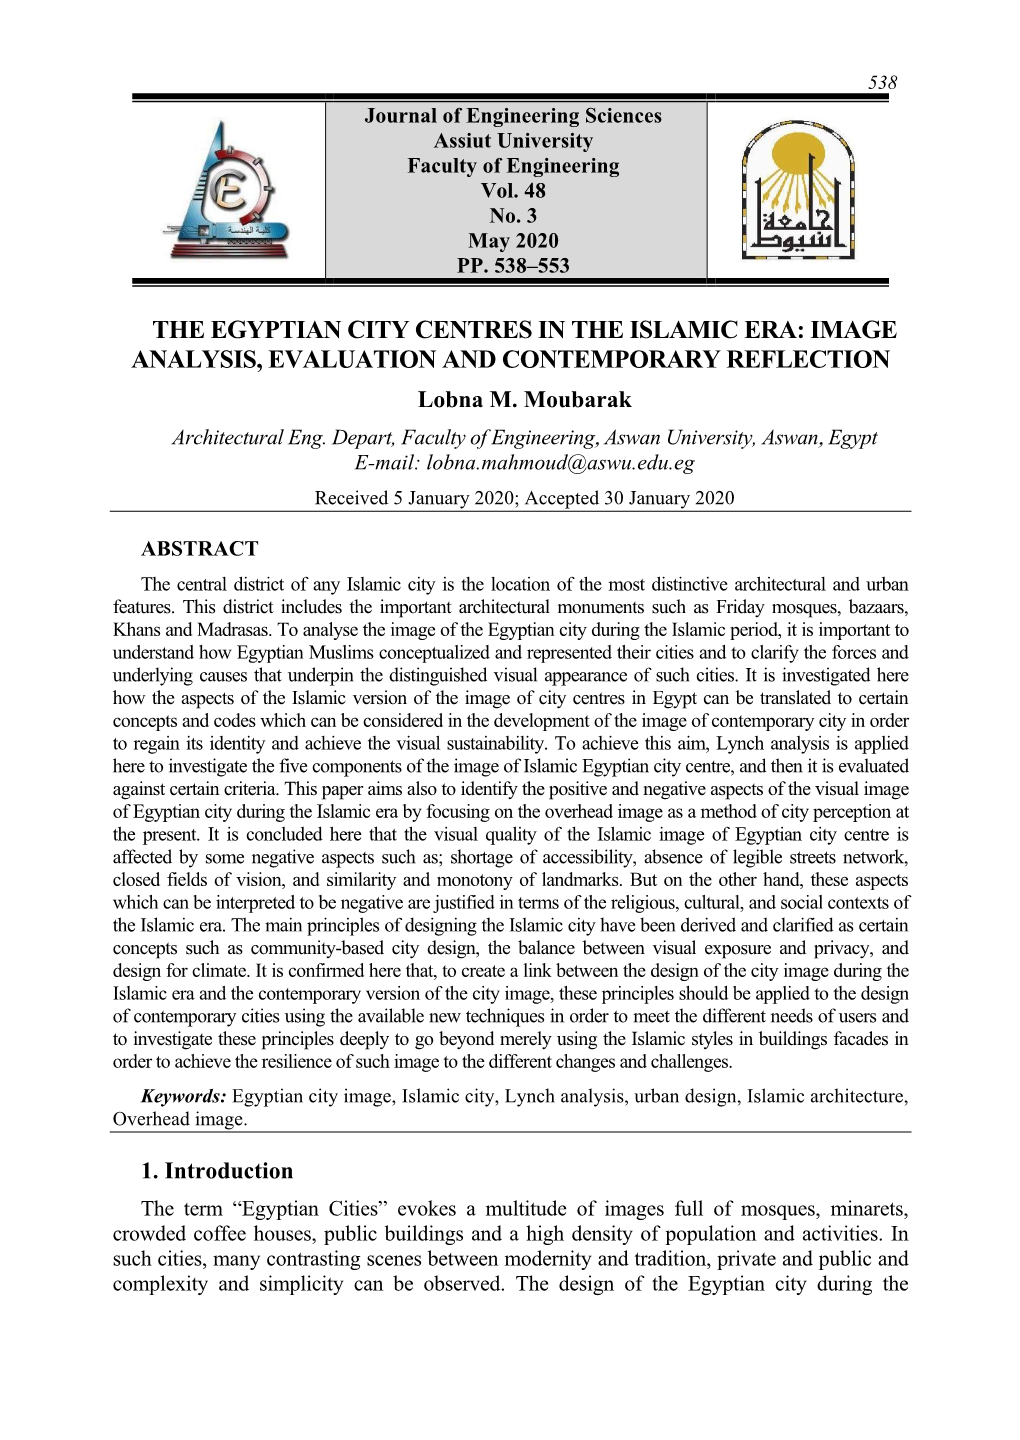 THE EGYPTIAN CITY CENTRES in the ISLAMIC ERA: IMAGE ANALYSIS, EVALUATION and CONTEMPORARY REFLECTION Lobna M